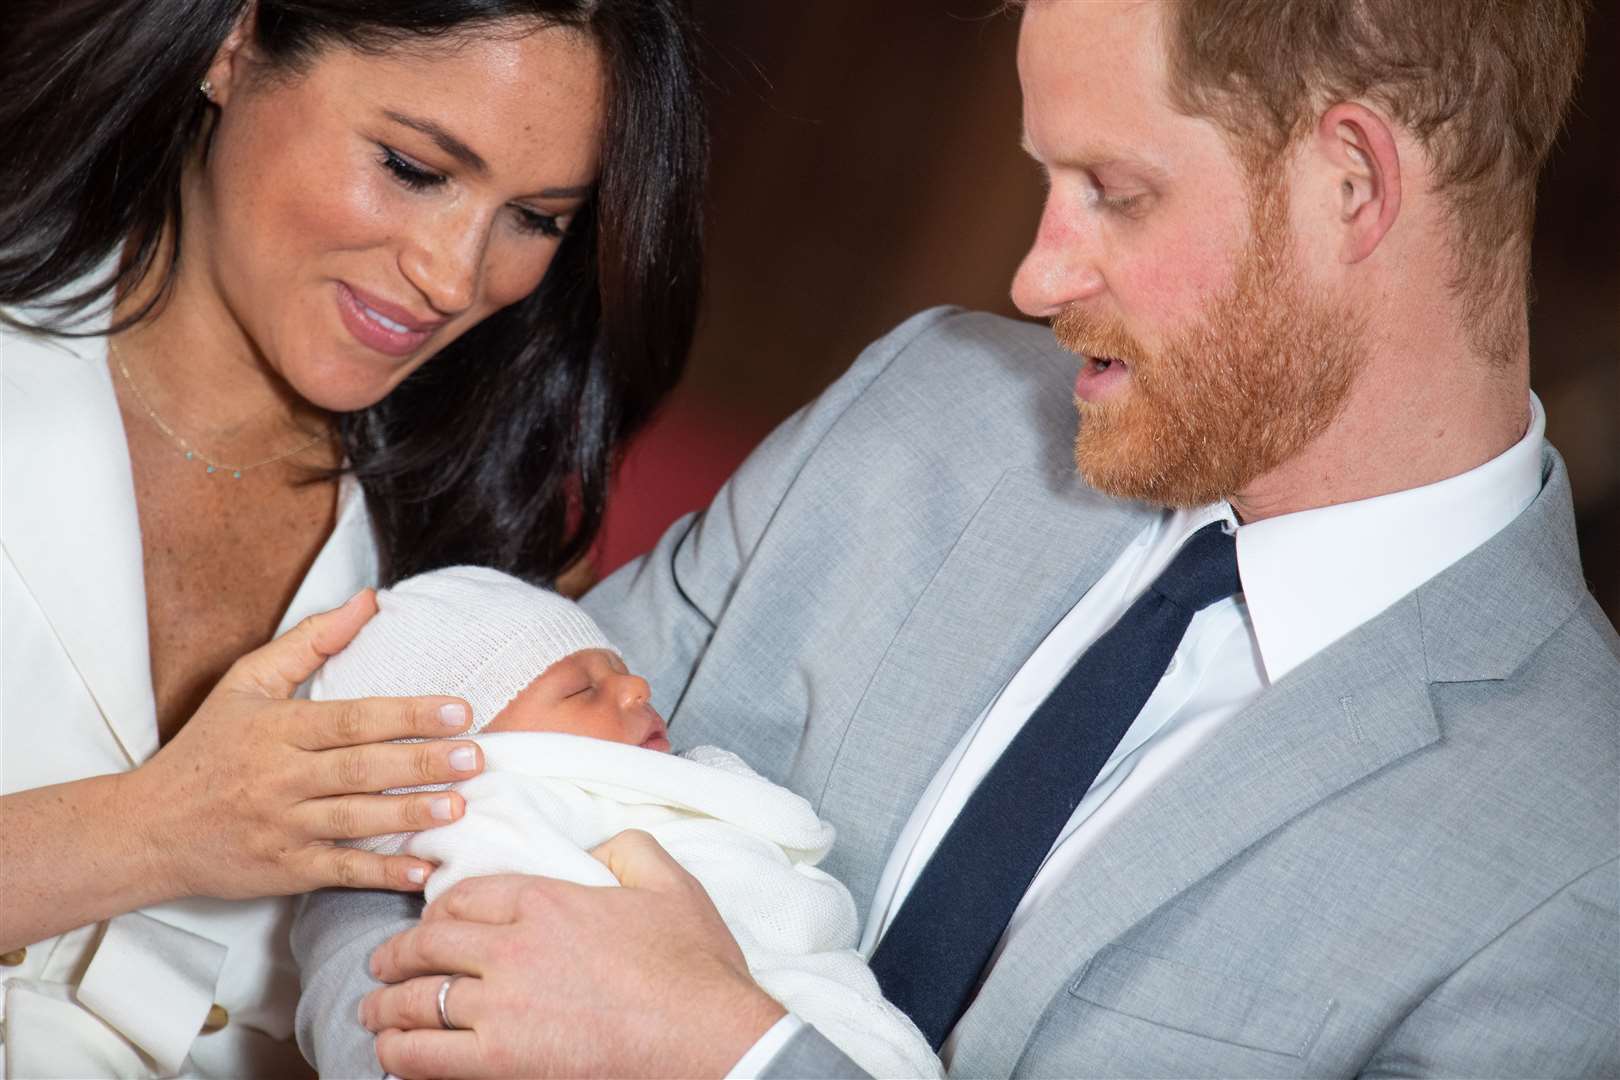 The Duke and Duchess of Sussex with their baby son who was given the name Archie